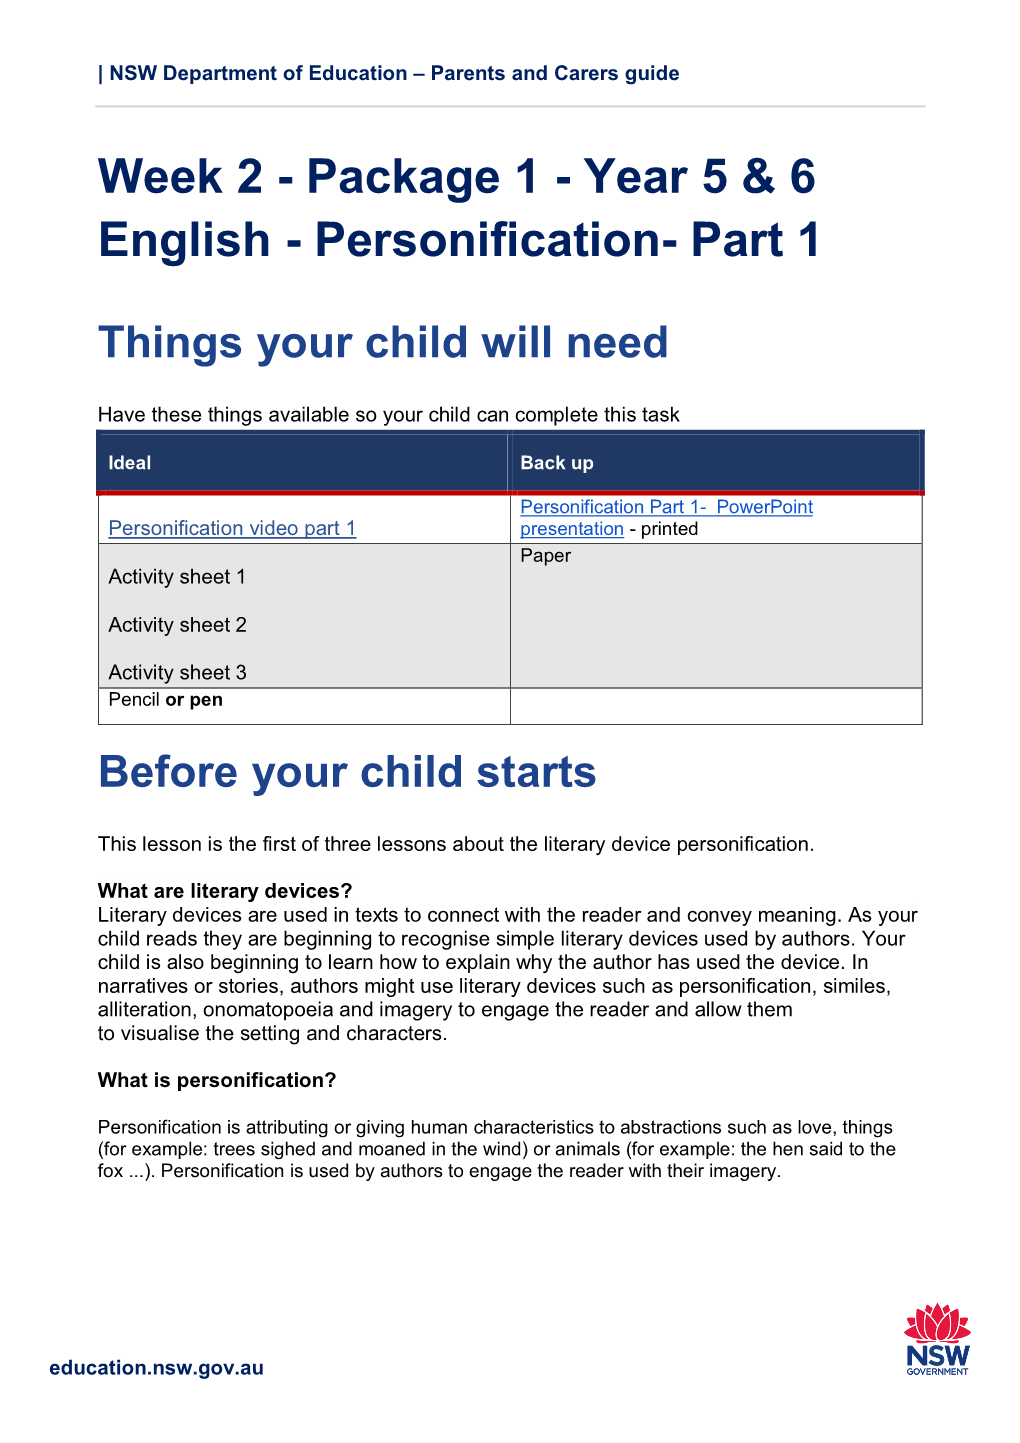 Week 2 - Package 1 - Year 5 & 6 English - Personification- Part 1